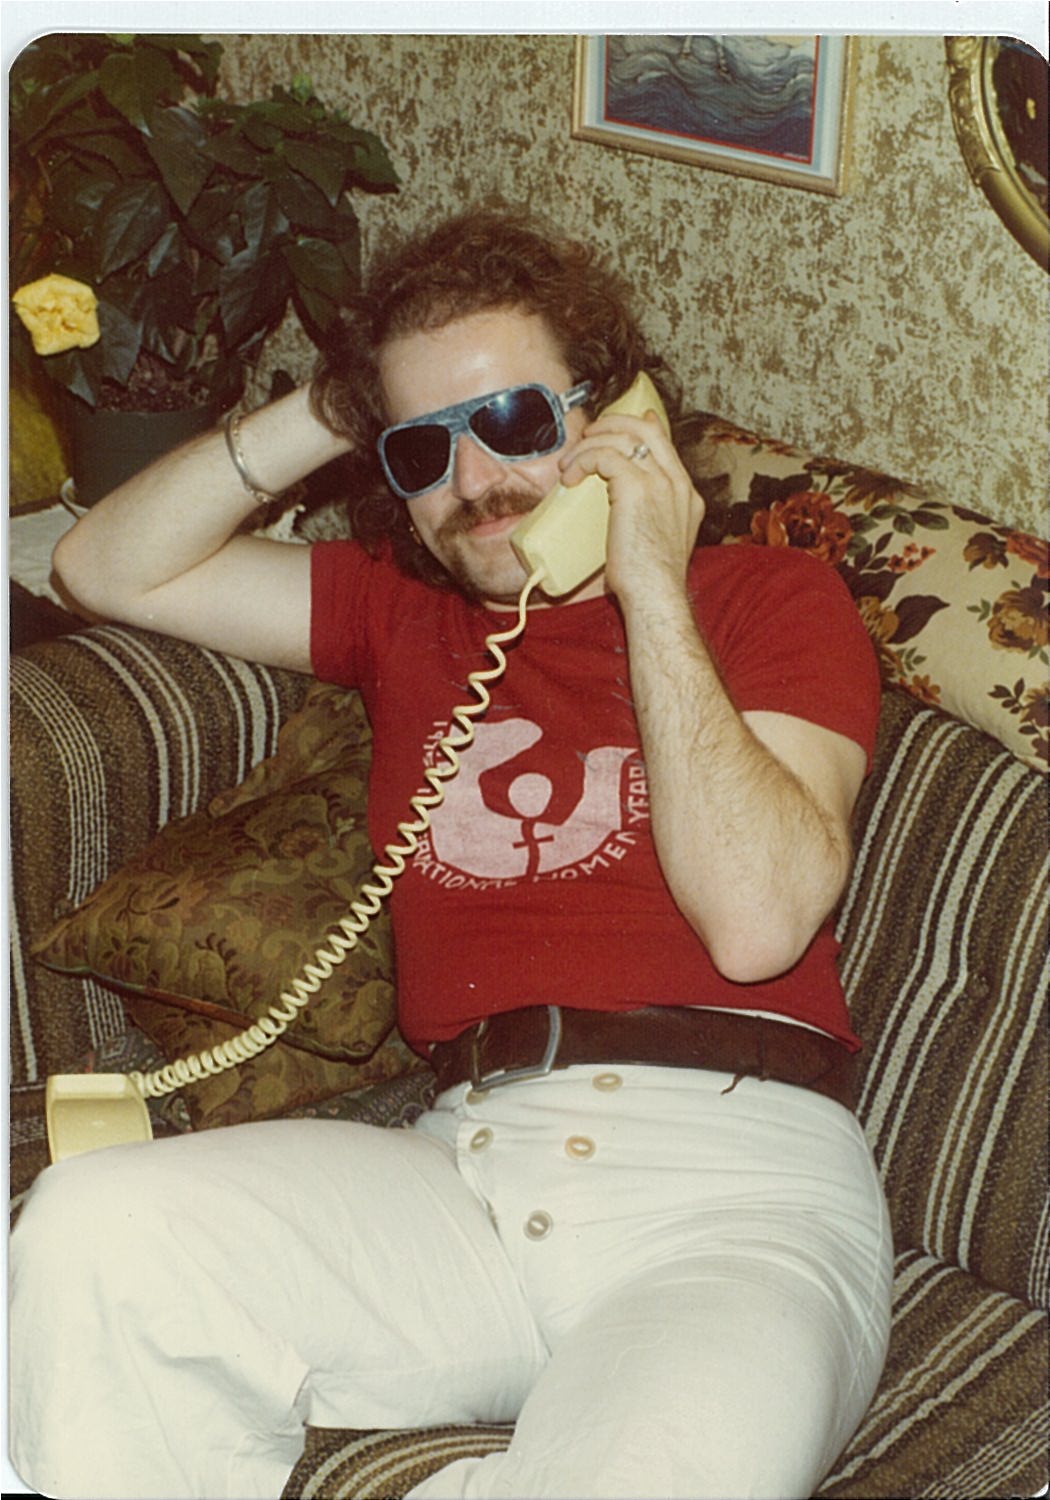 person with dark hair, mustache, white trousers and red tshirt sitting on couch and talkin on phone